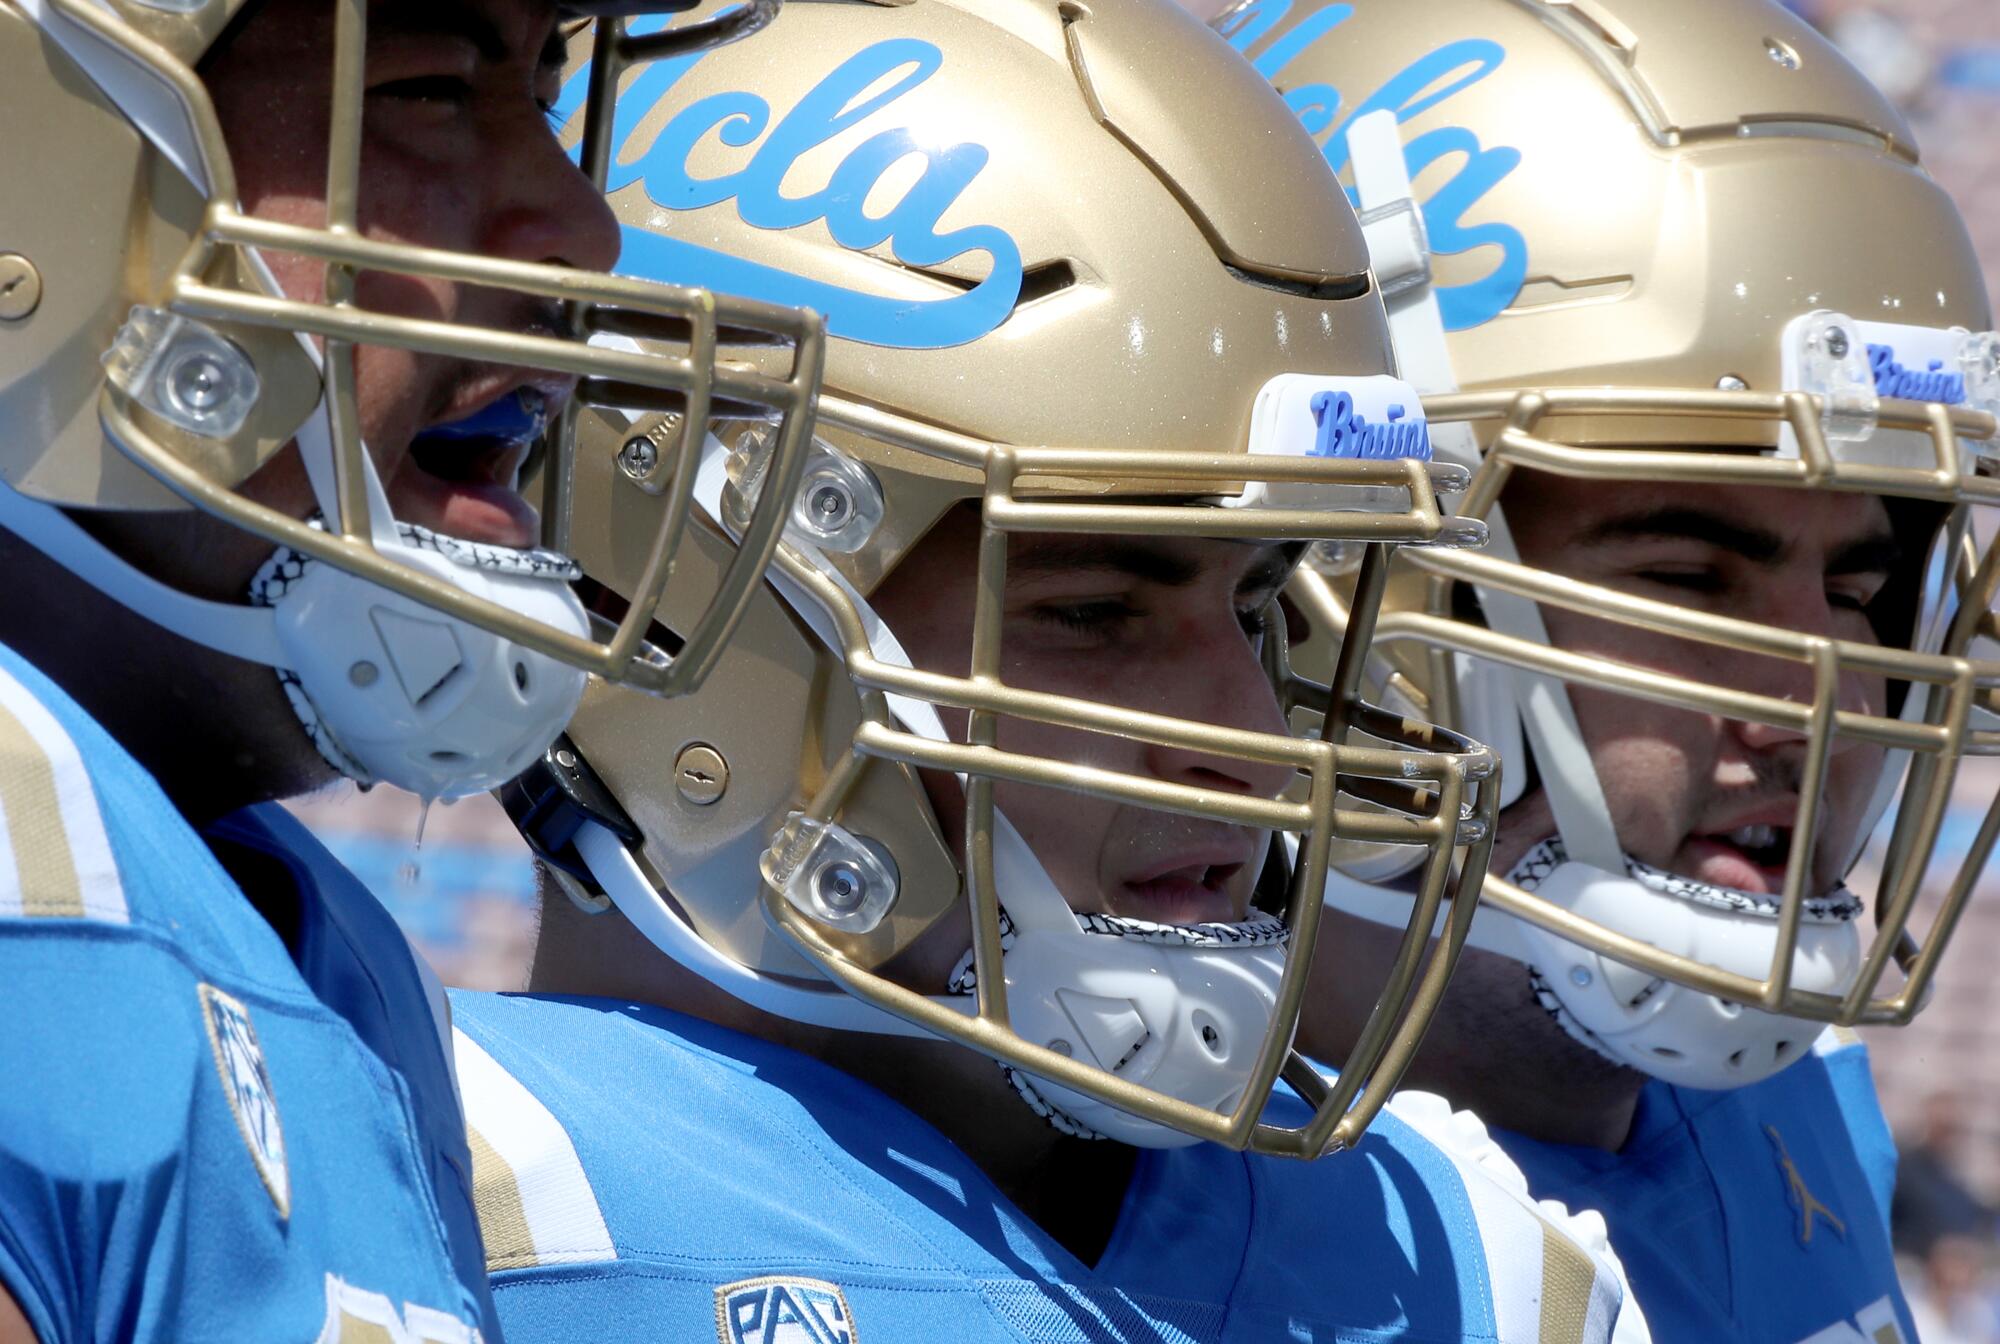 UCLA players take the field for a game against Hawaii at the Rose Bowl.